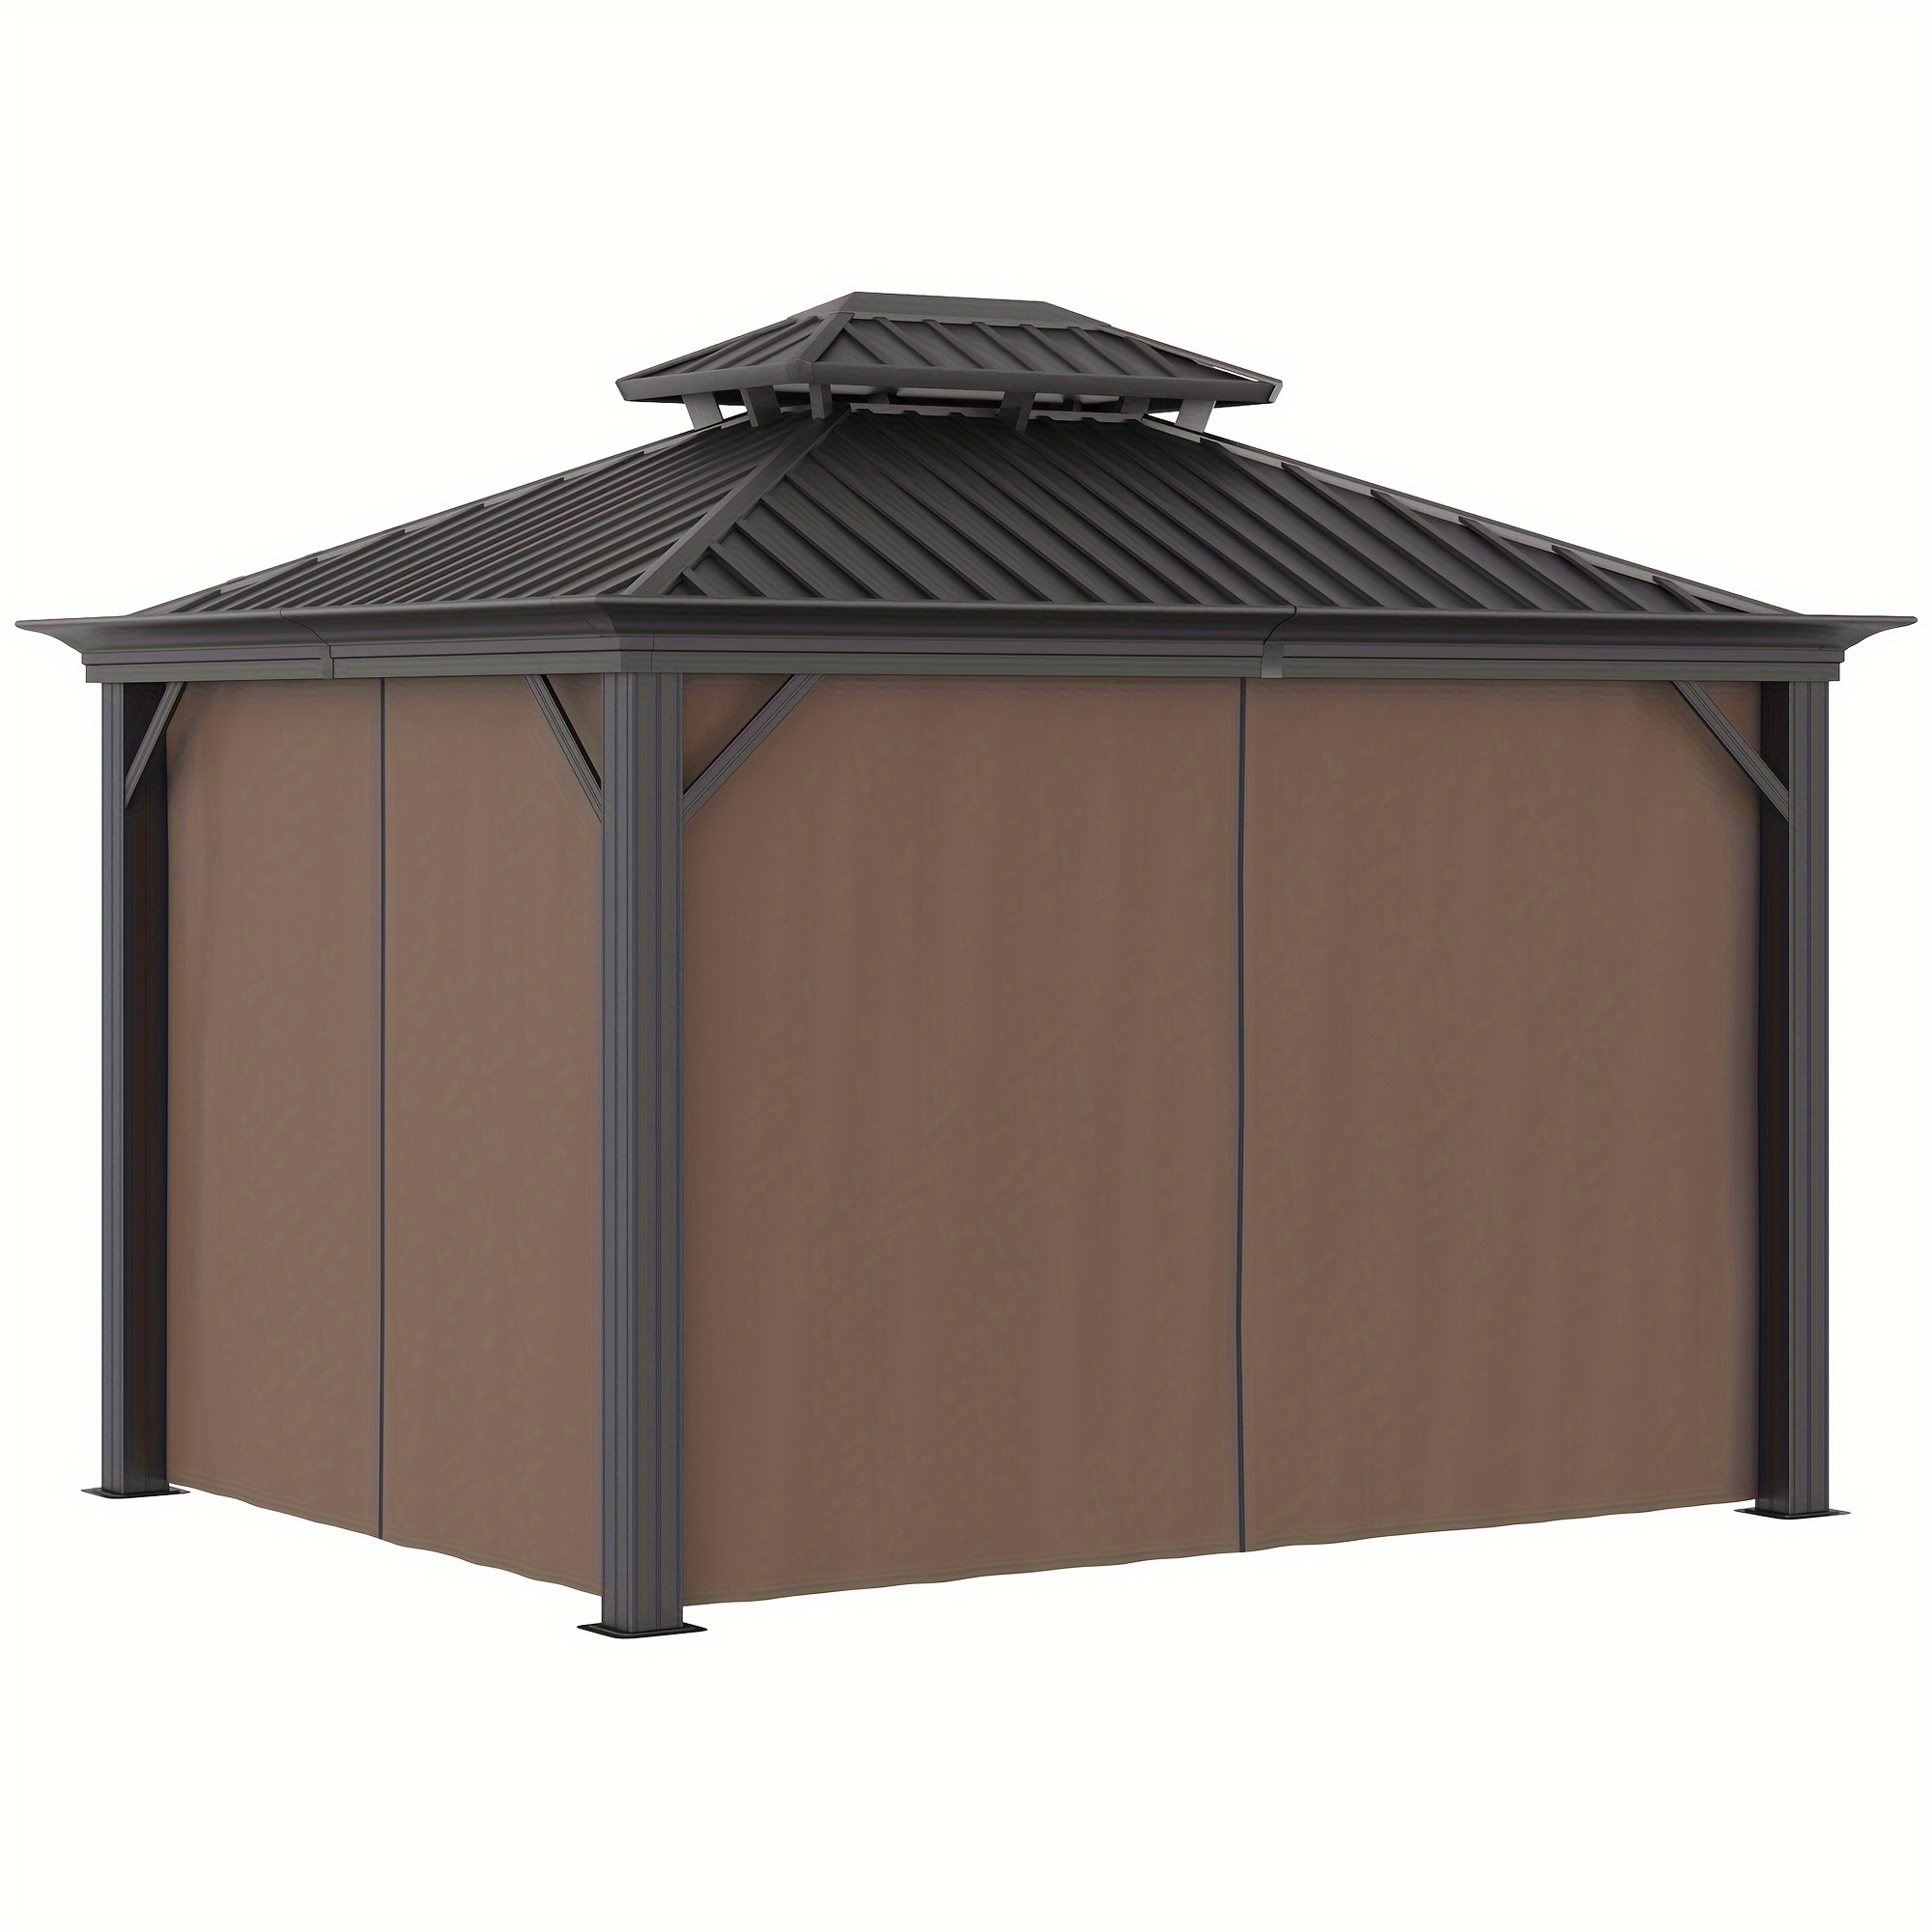 

Outsunny 10' X 12' Gazebo With Curtains And Netting, Permanent Pavilion Metal Double Roof Gazebo Canopy With Aluminum Frame And Hooks, For Garden, Patio, Backyard